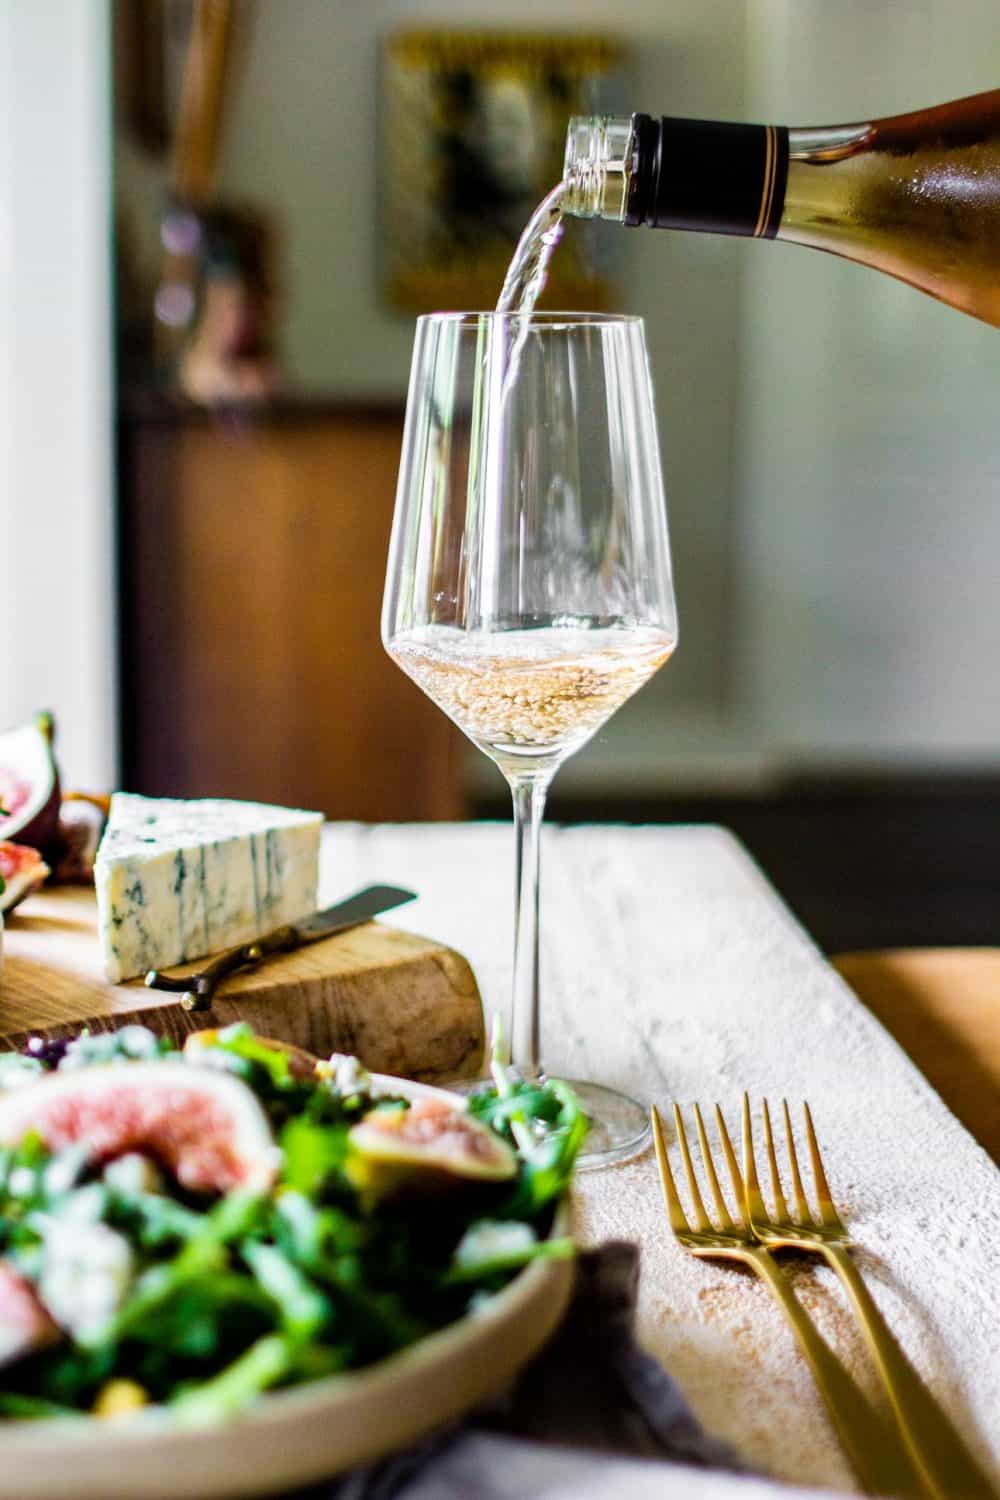 Wine and food recipes from California Grown featuring chardonnay.